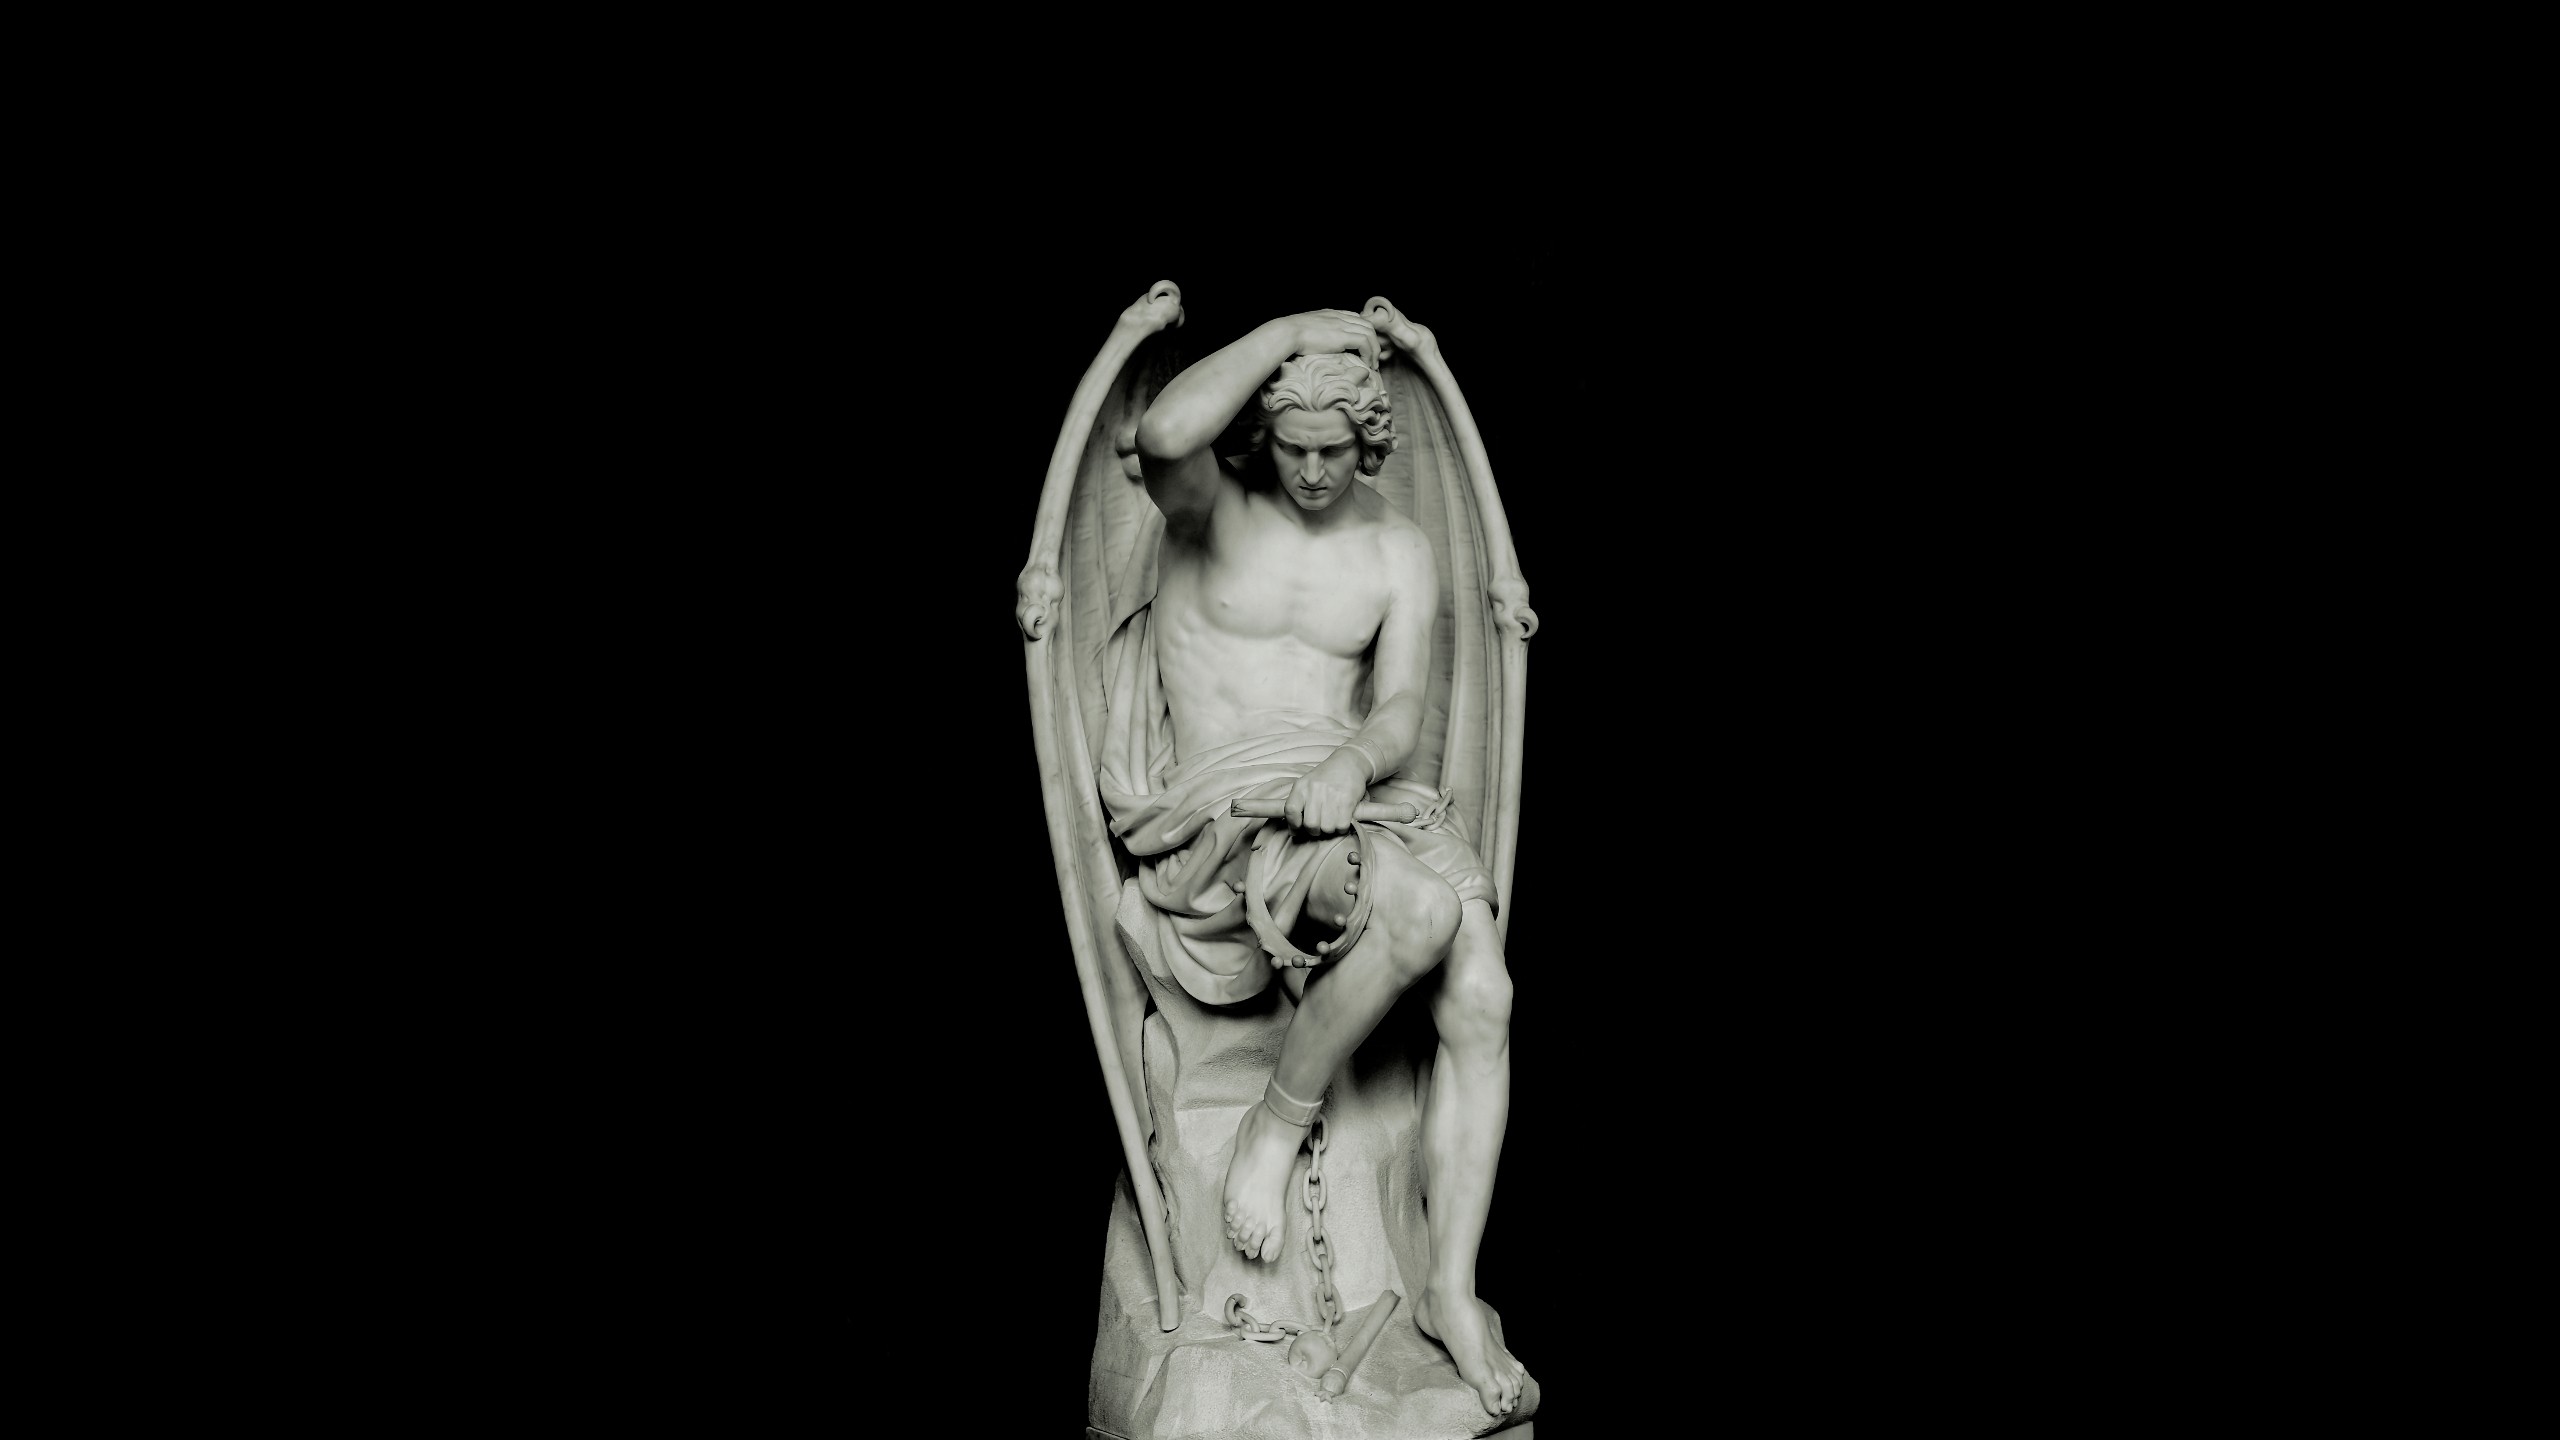 General 2560x1440 traditional art statue Lucifer Satan simple background